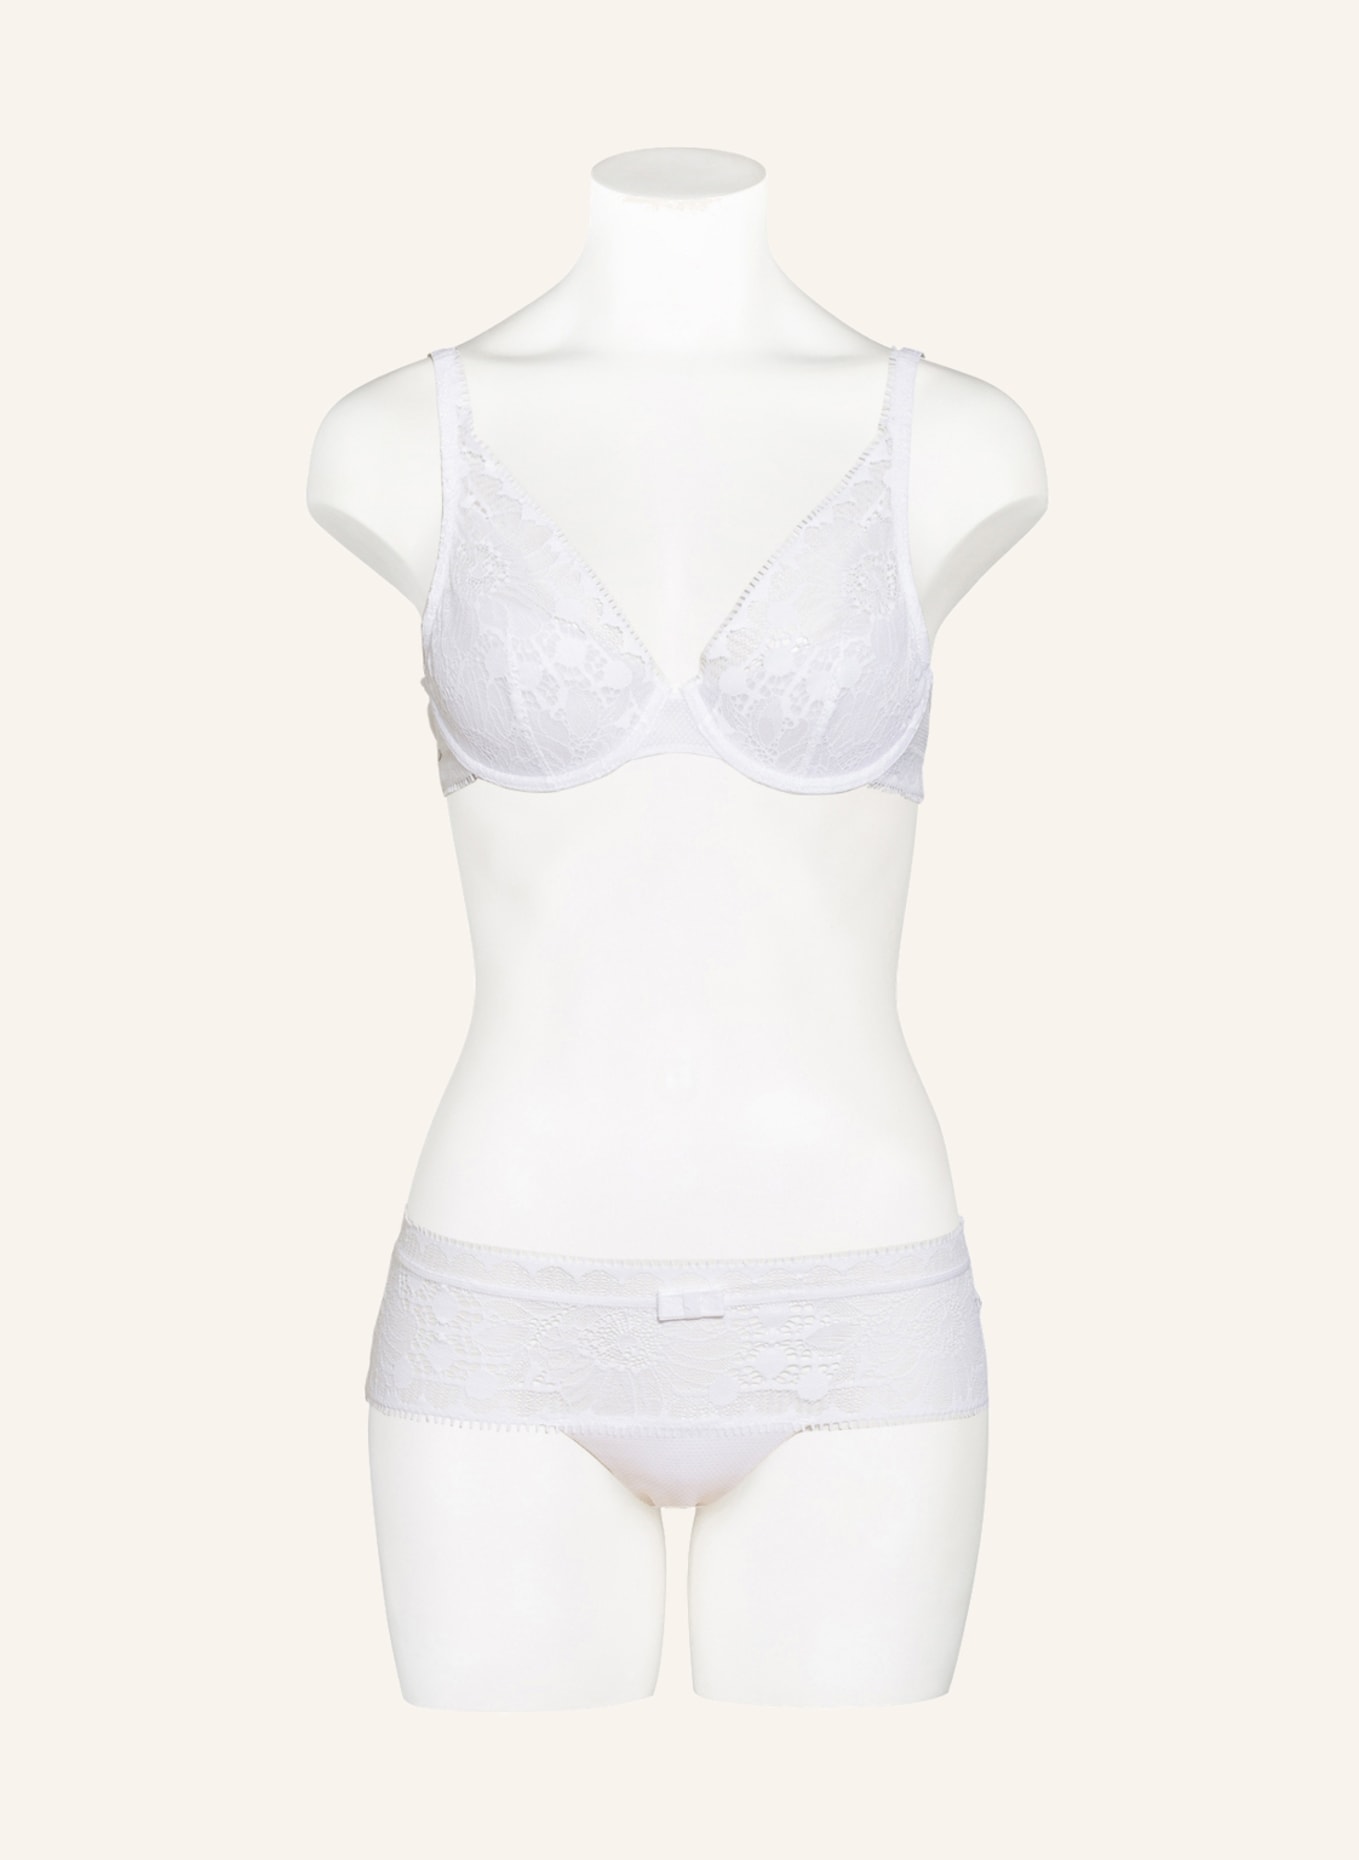 CHANTELLE Spacer bra DAY TO NIGHT in white